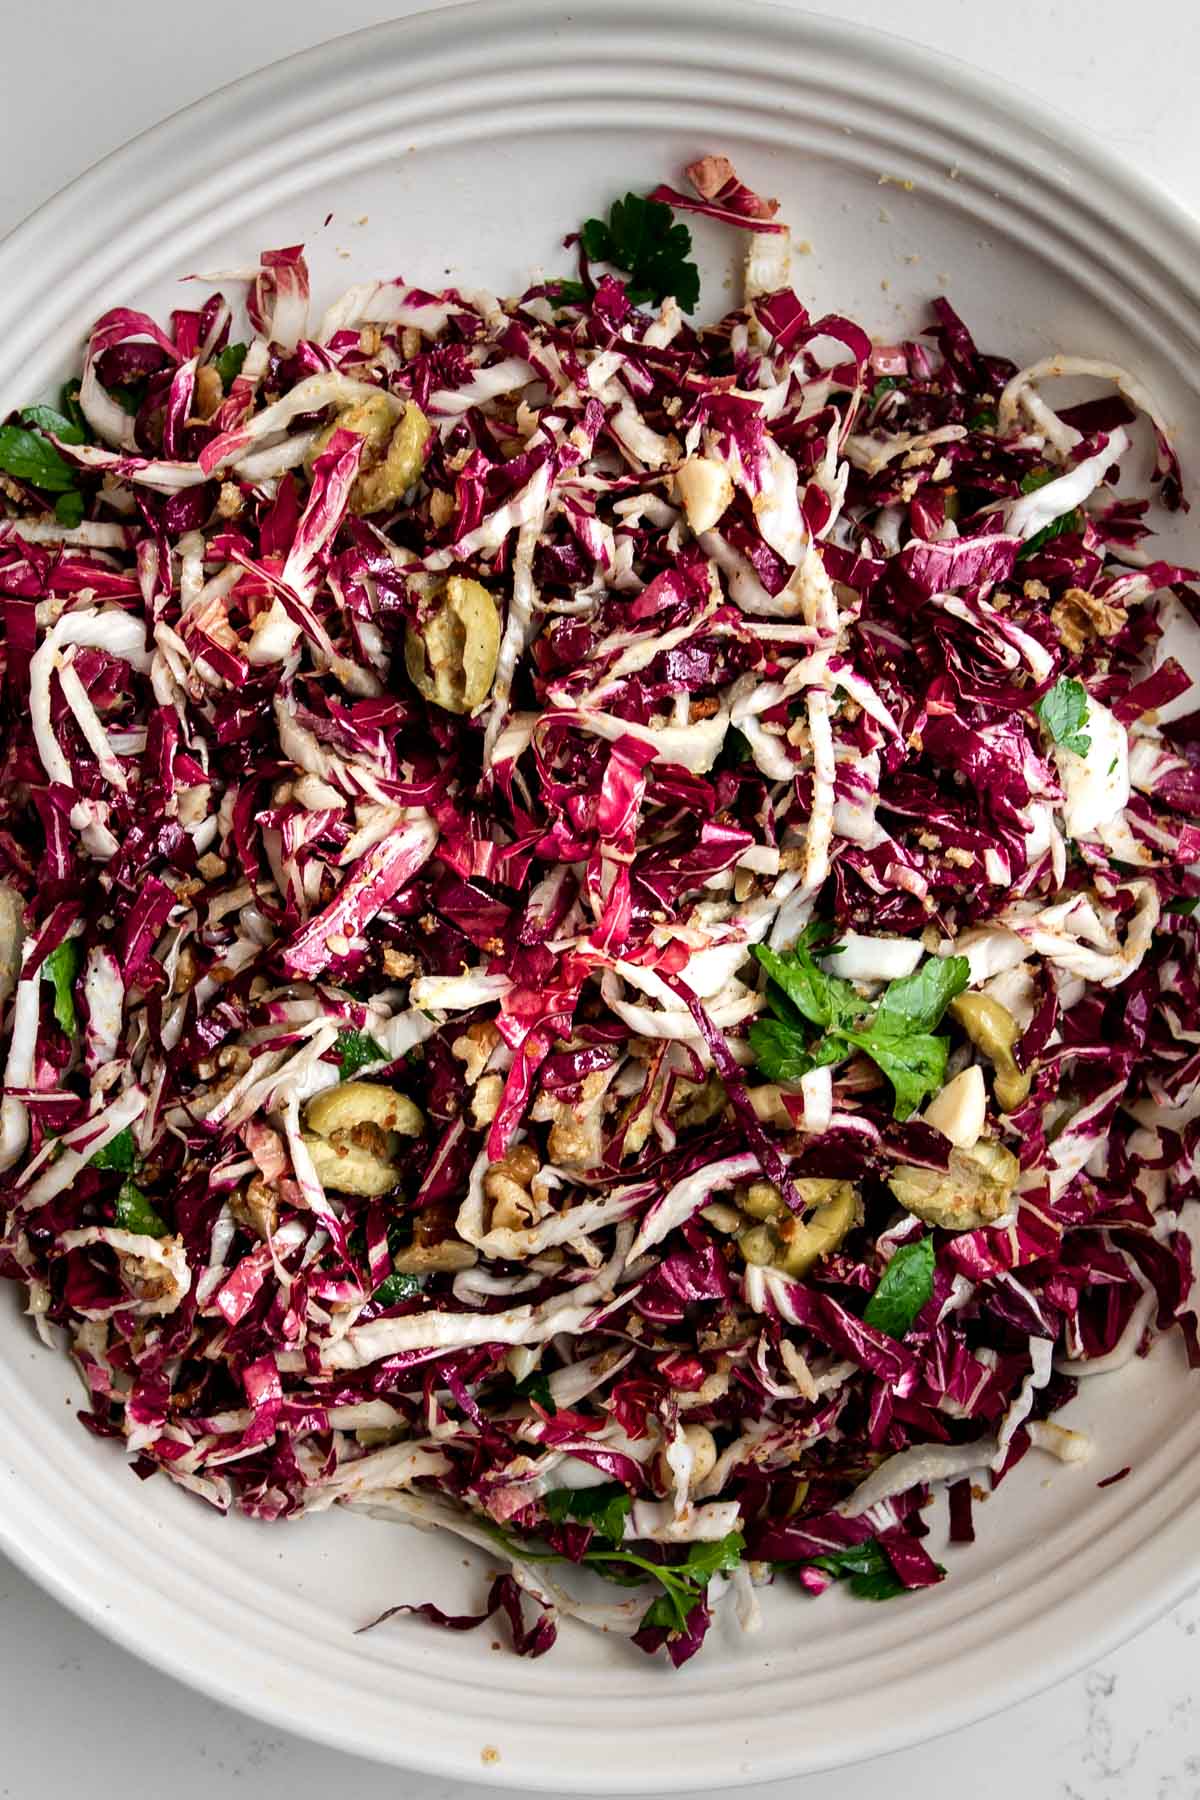 radicchio salad topped with olives, walnuts and parsley.